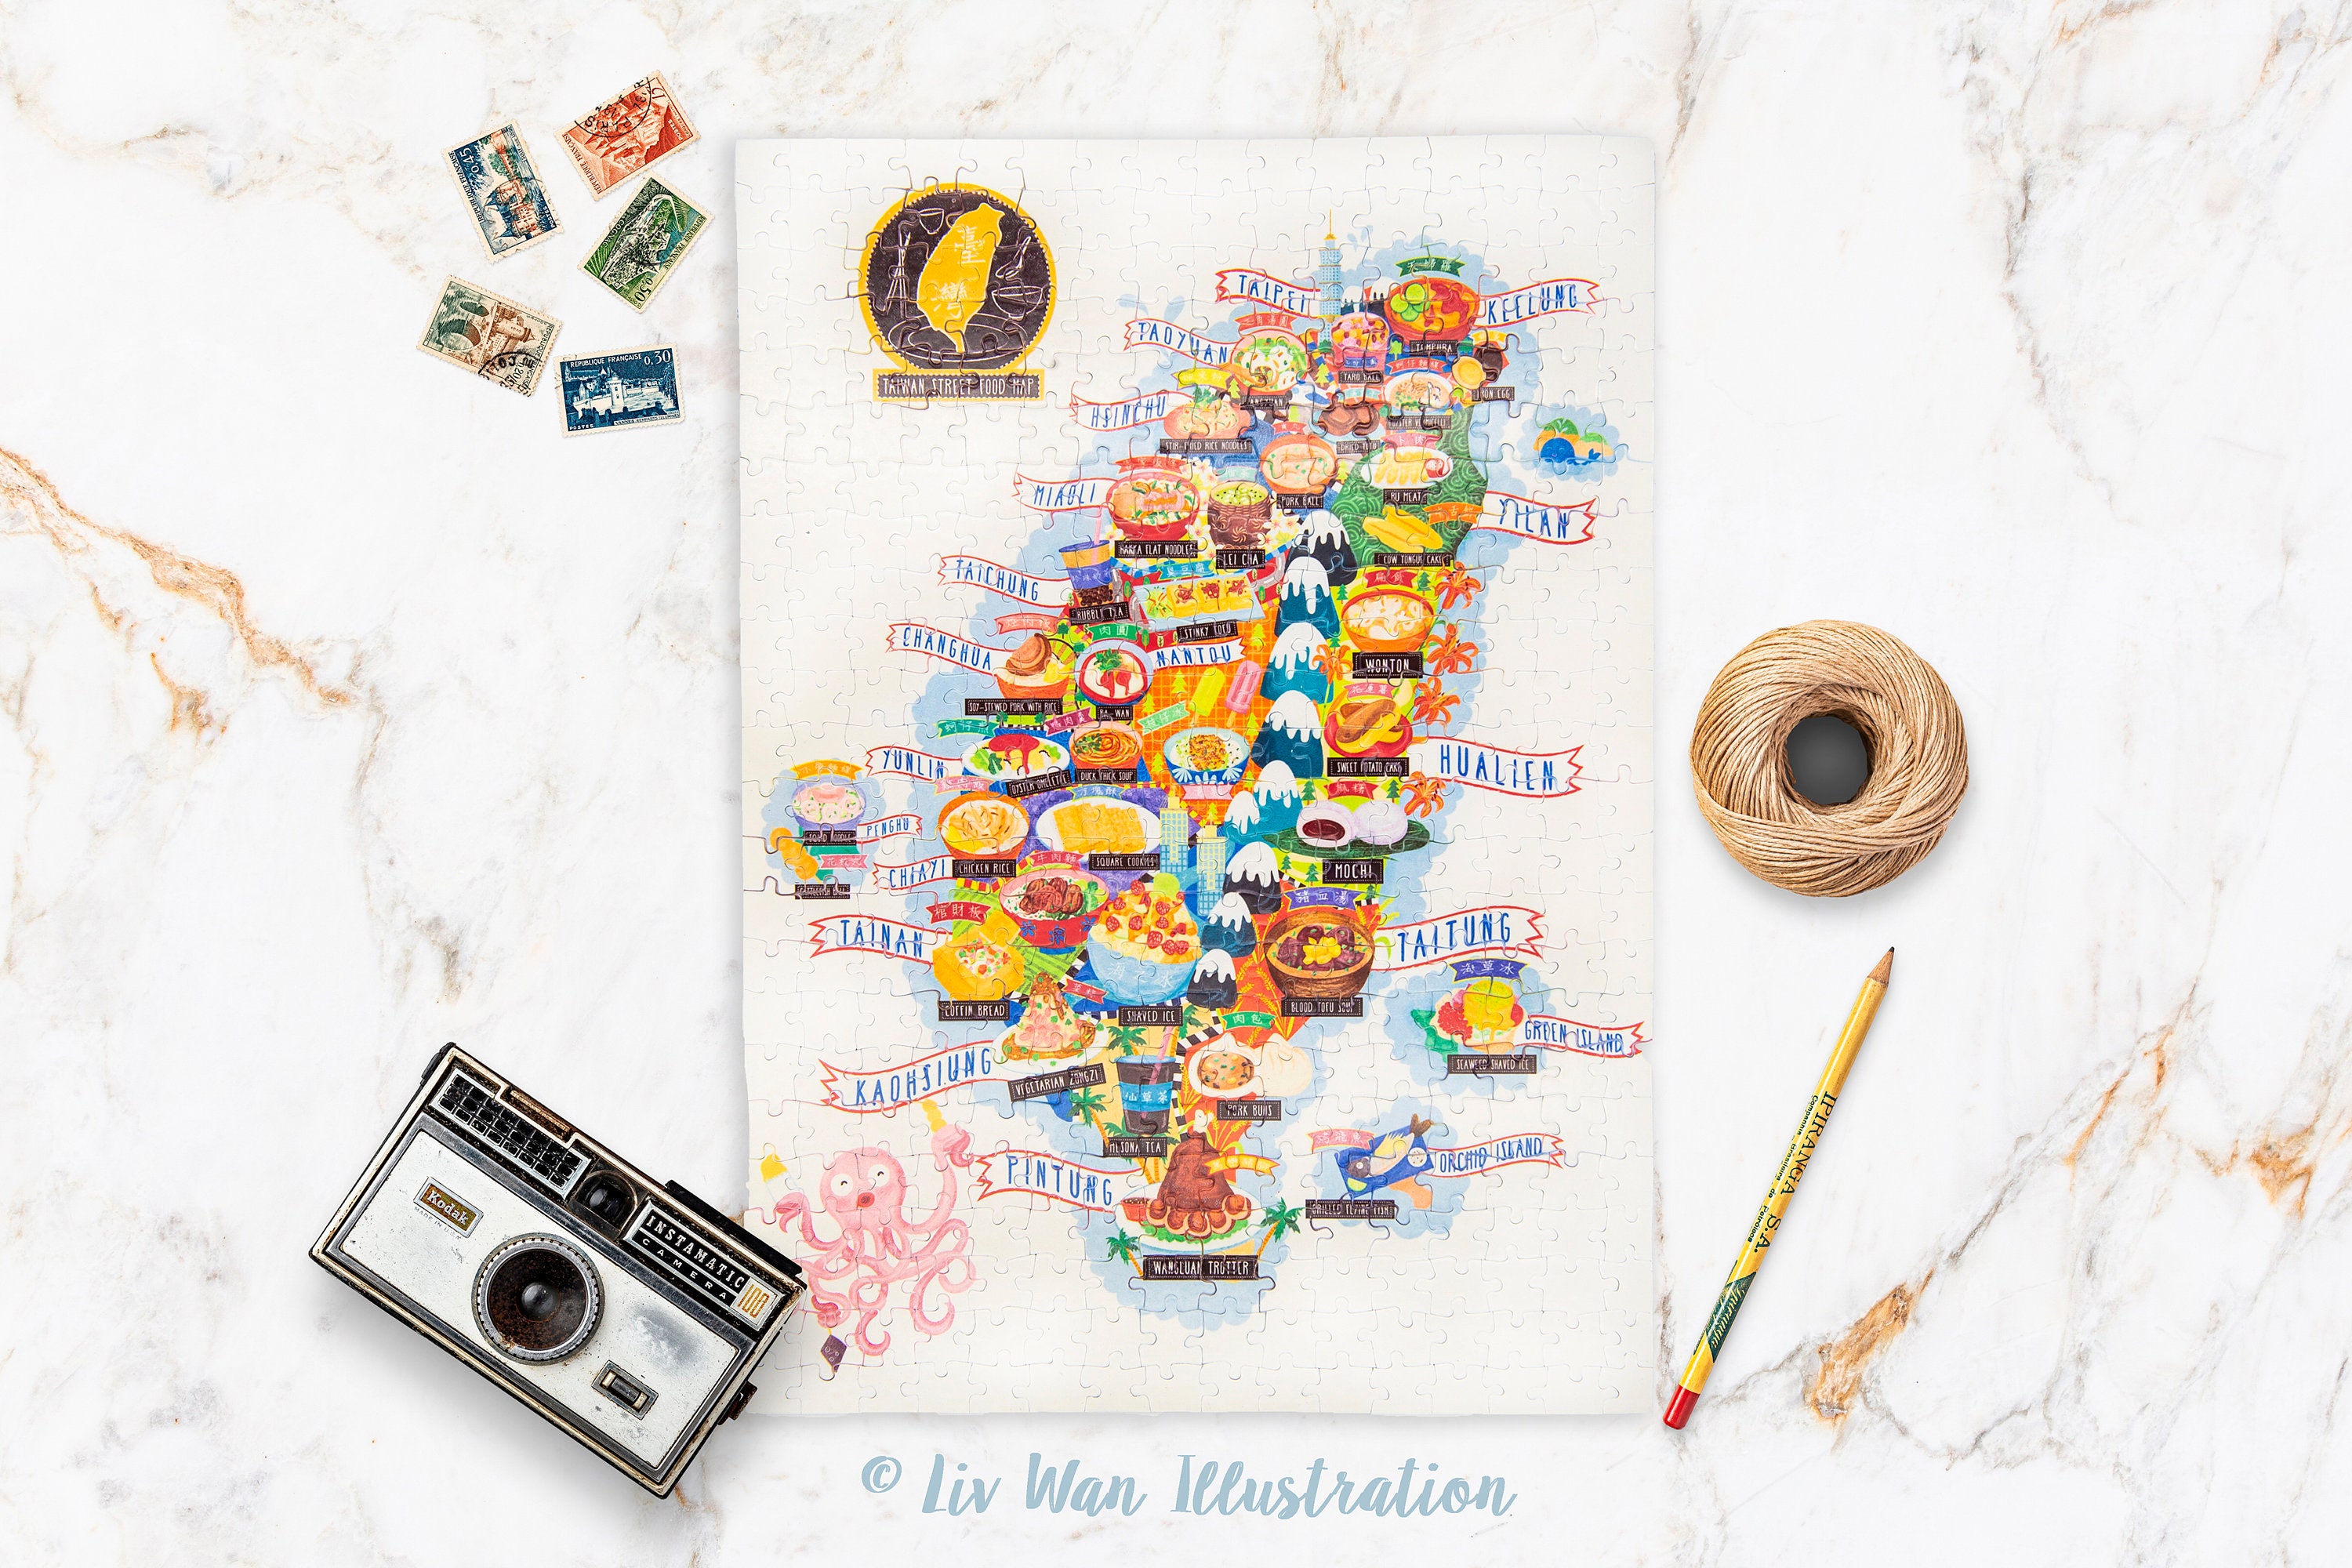 France Food Map Jigsaw Puzzle Premium Hand-made 300 Piece Jigsaw Puzzle 